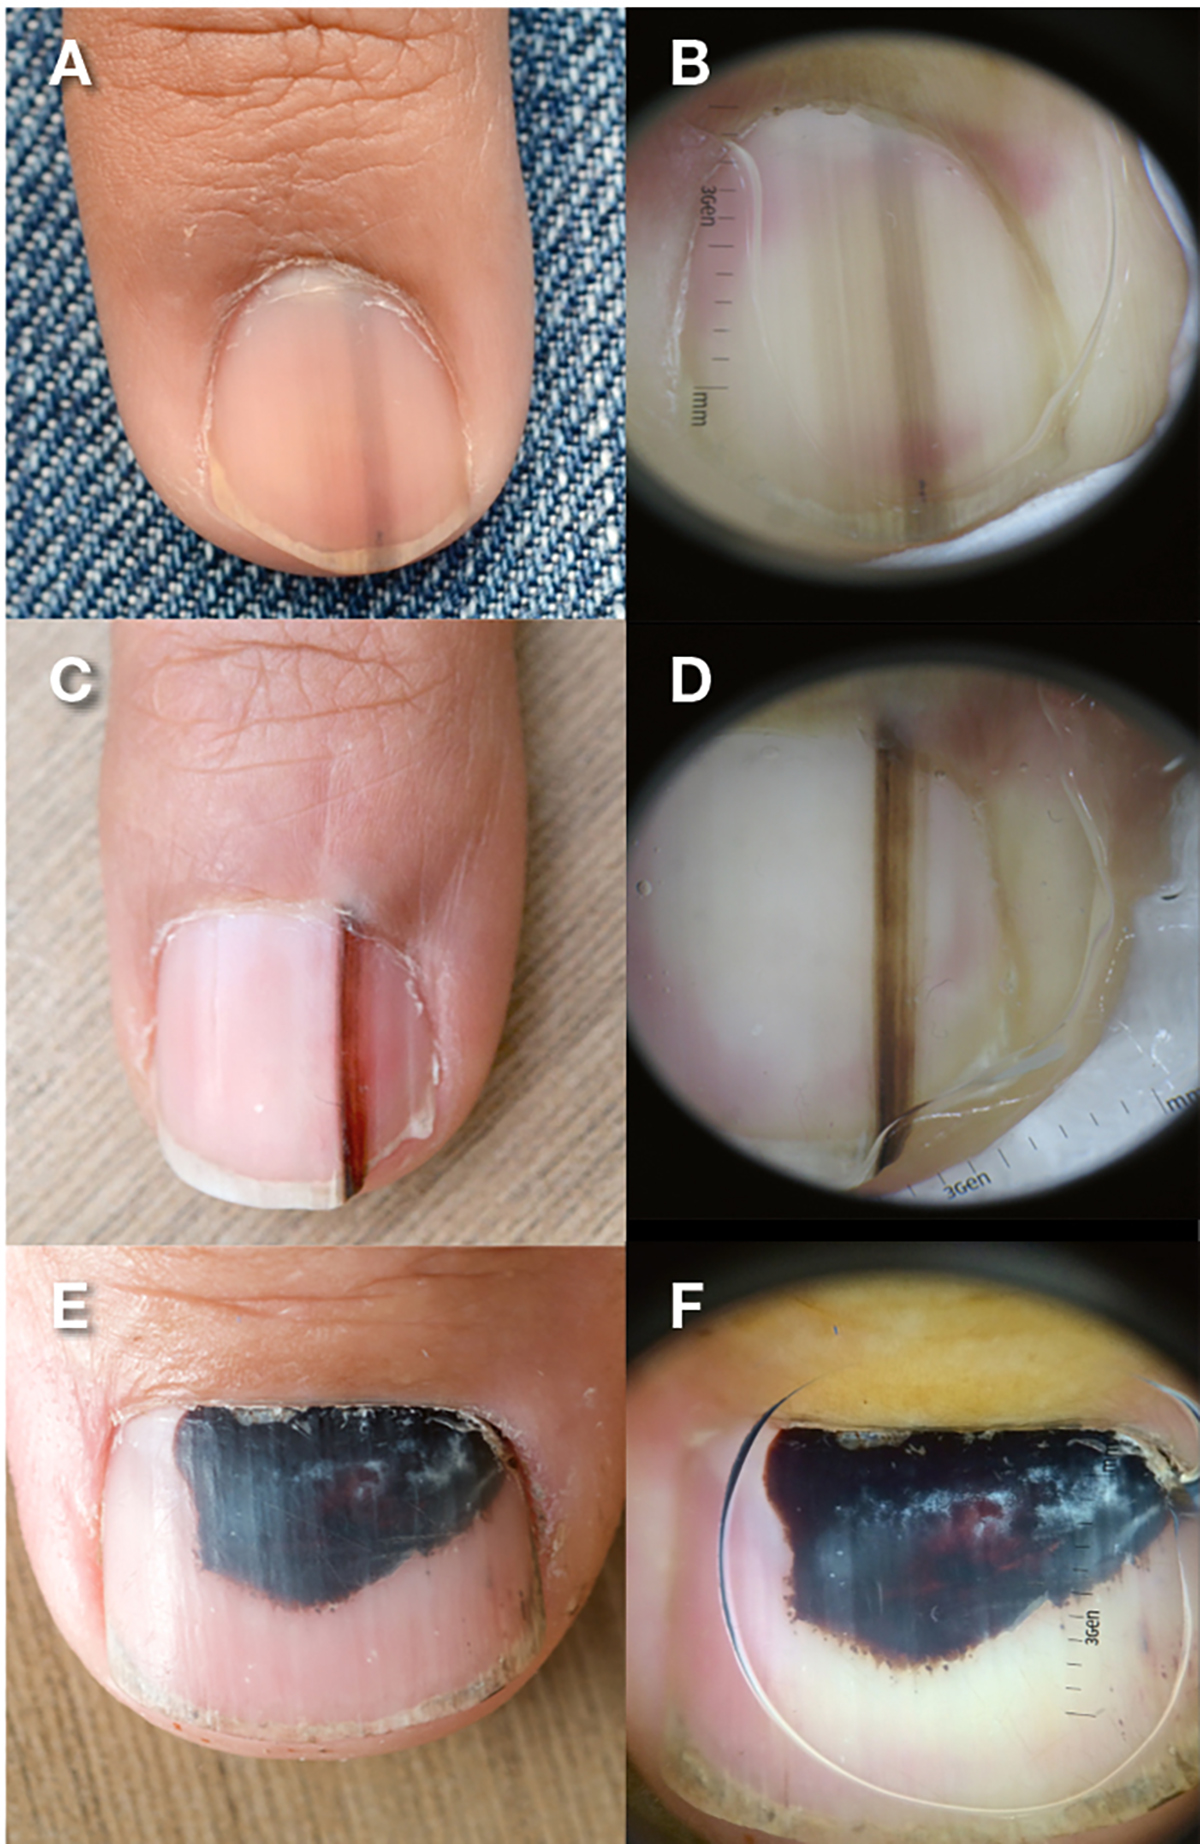 Doctors Warn Of Potentiall Deadly Form Of Nail Cancer  YouTube